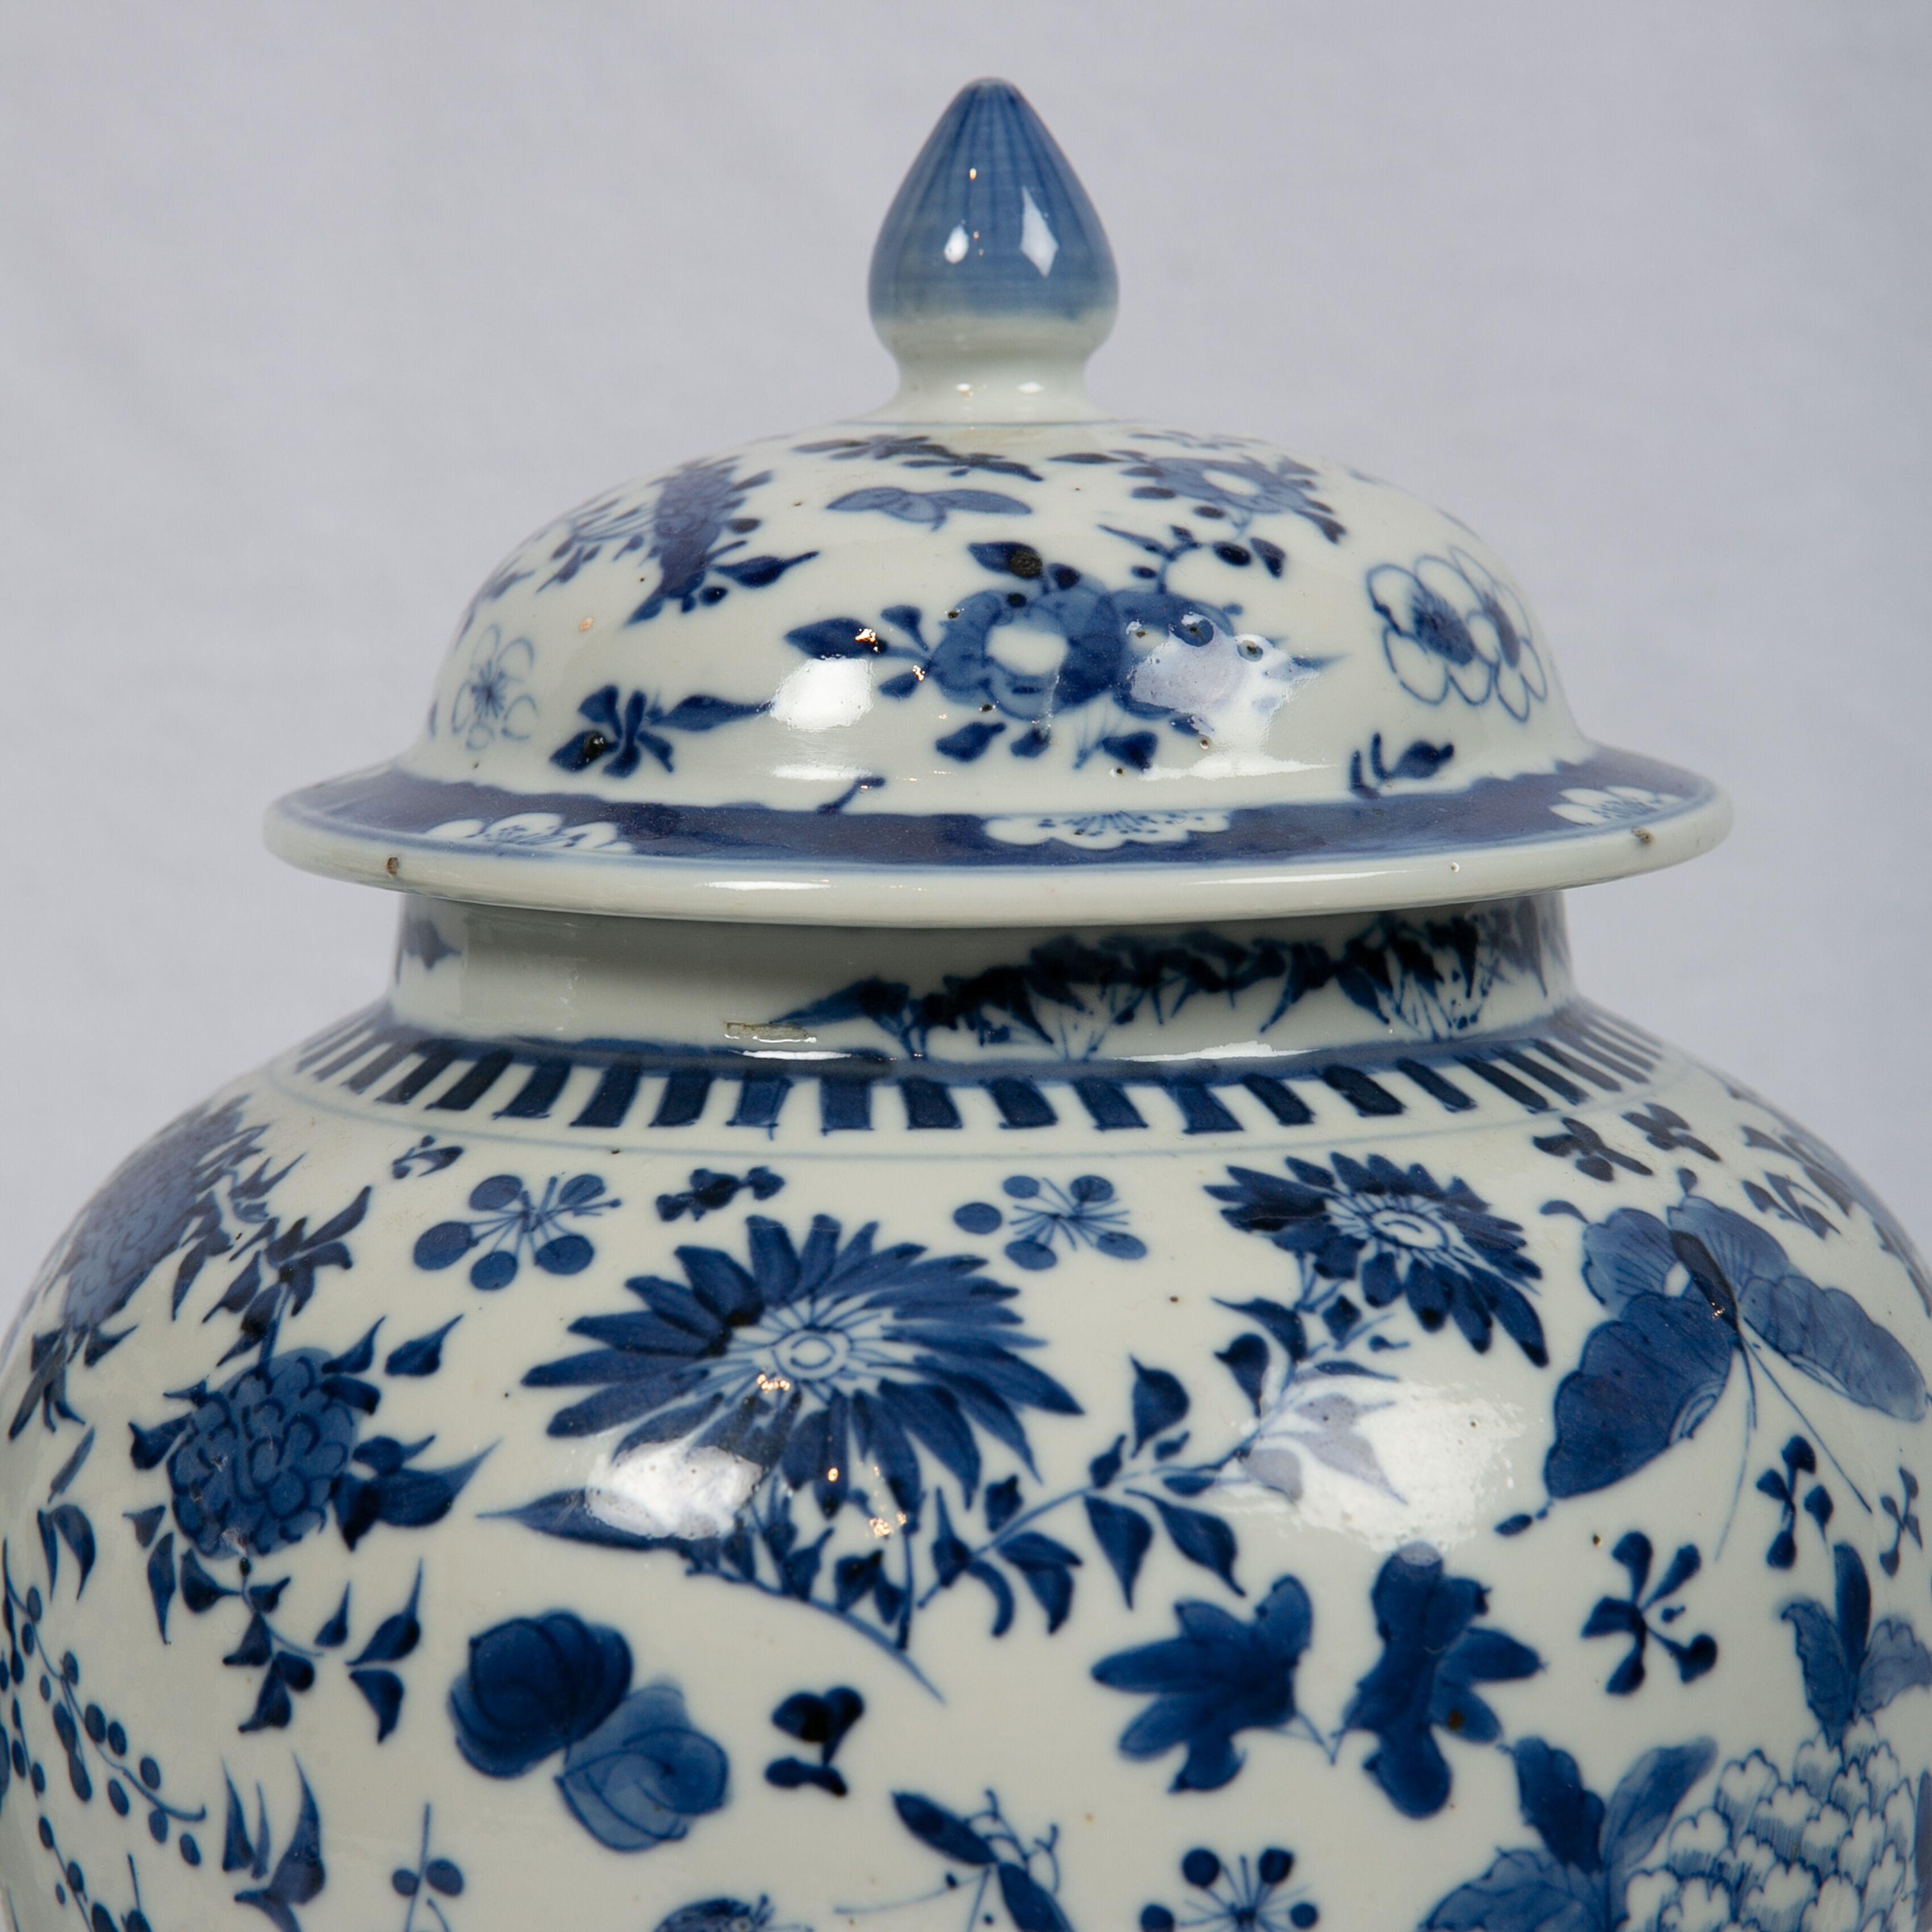 Hand-Painted Pair of Chinese Porcelain Blue and White Covered Jars 19th Century Qing Dynasty